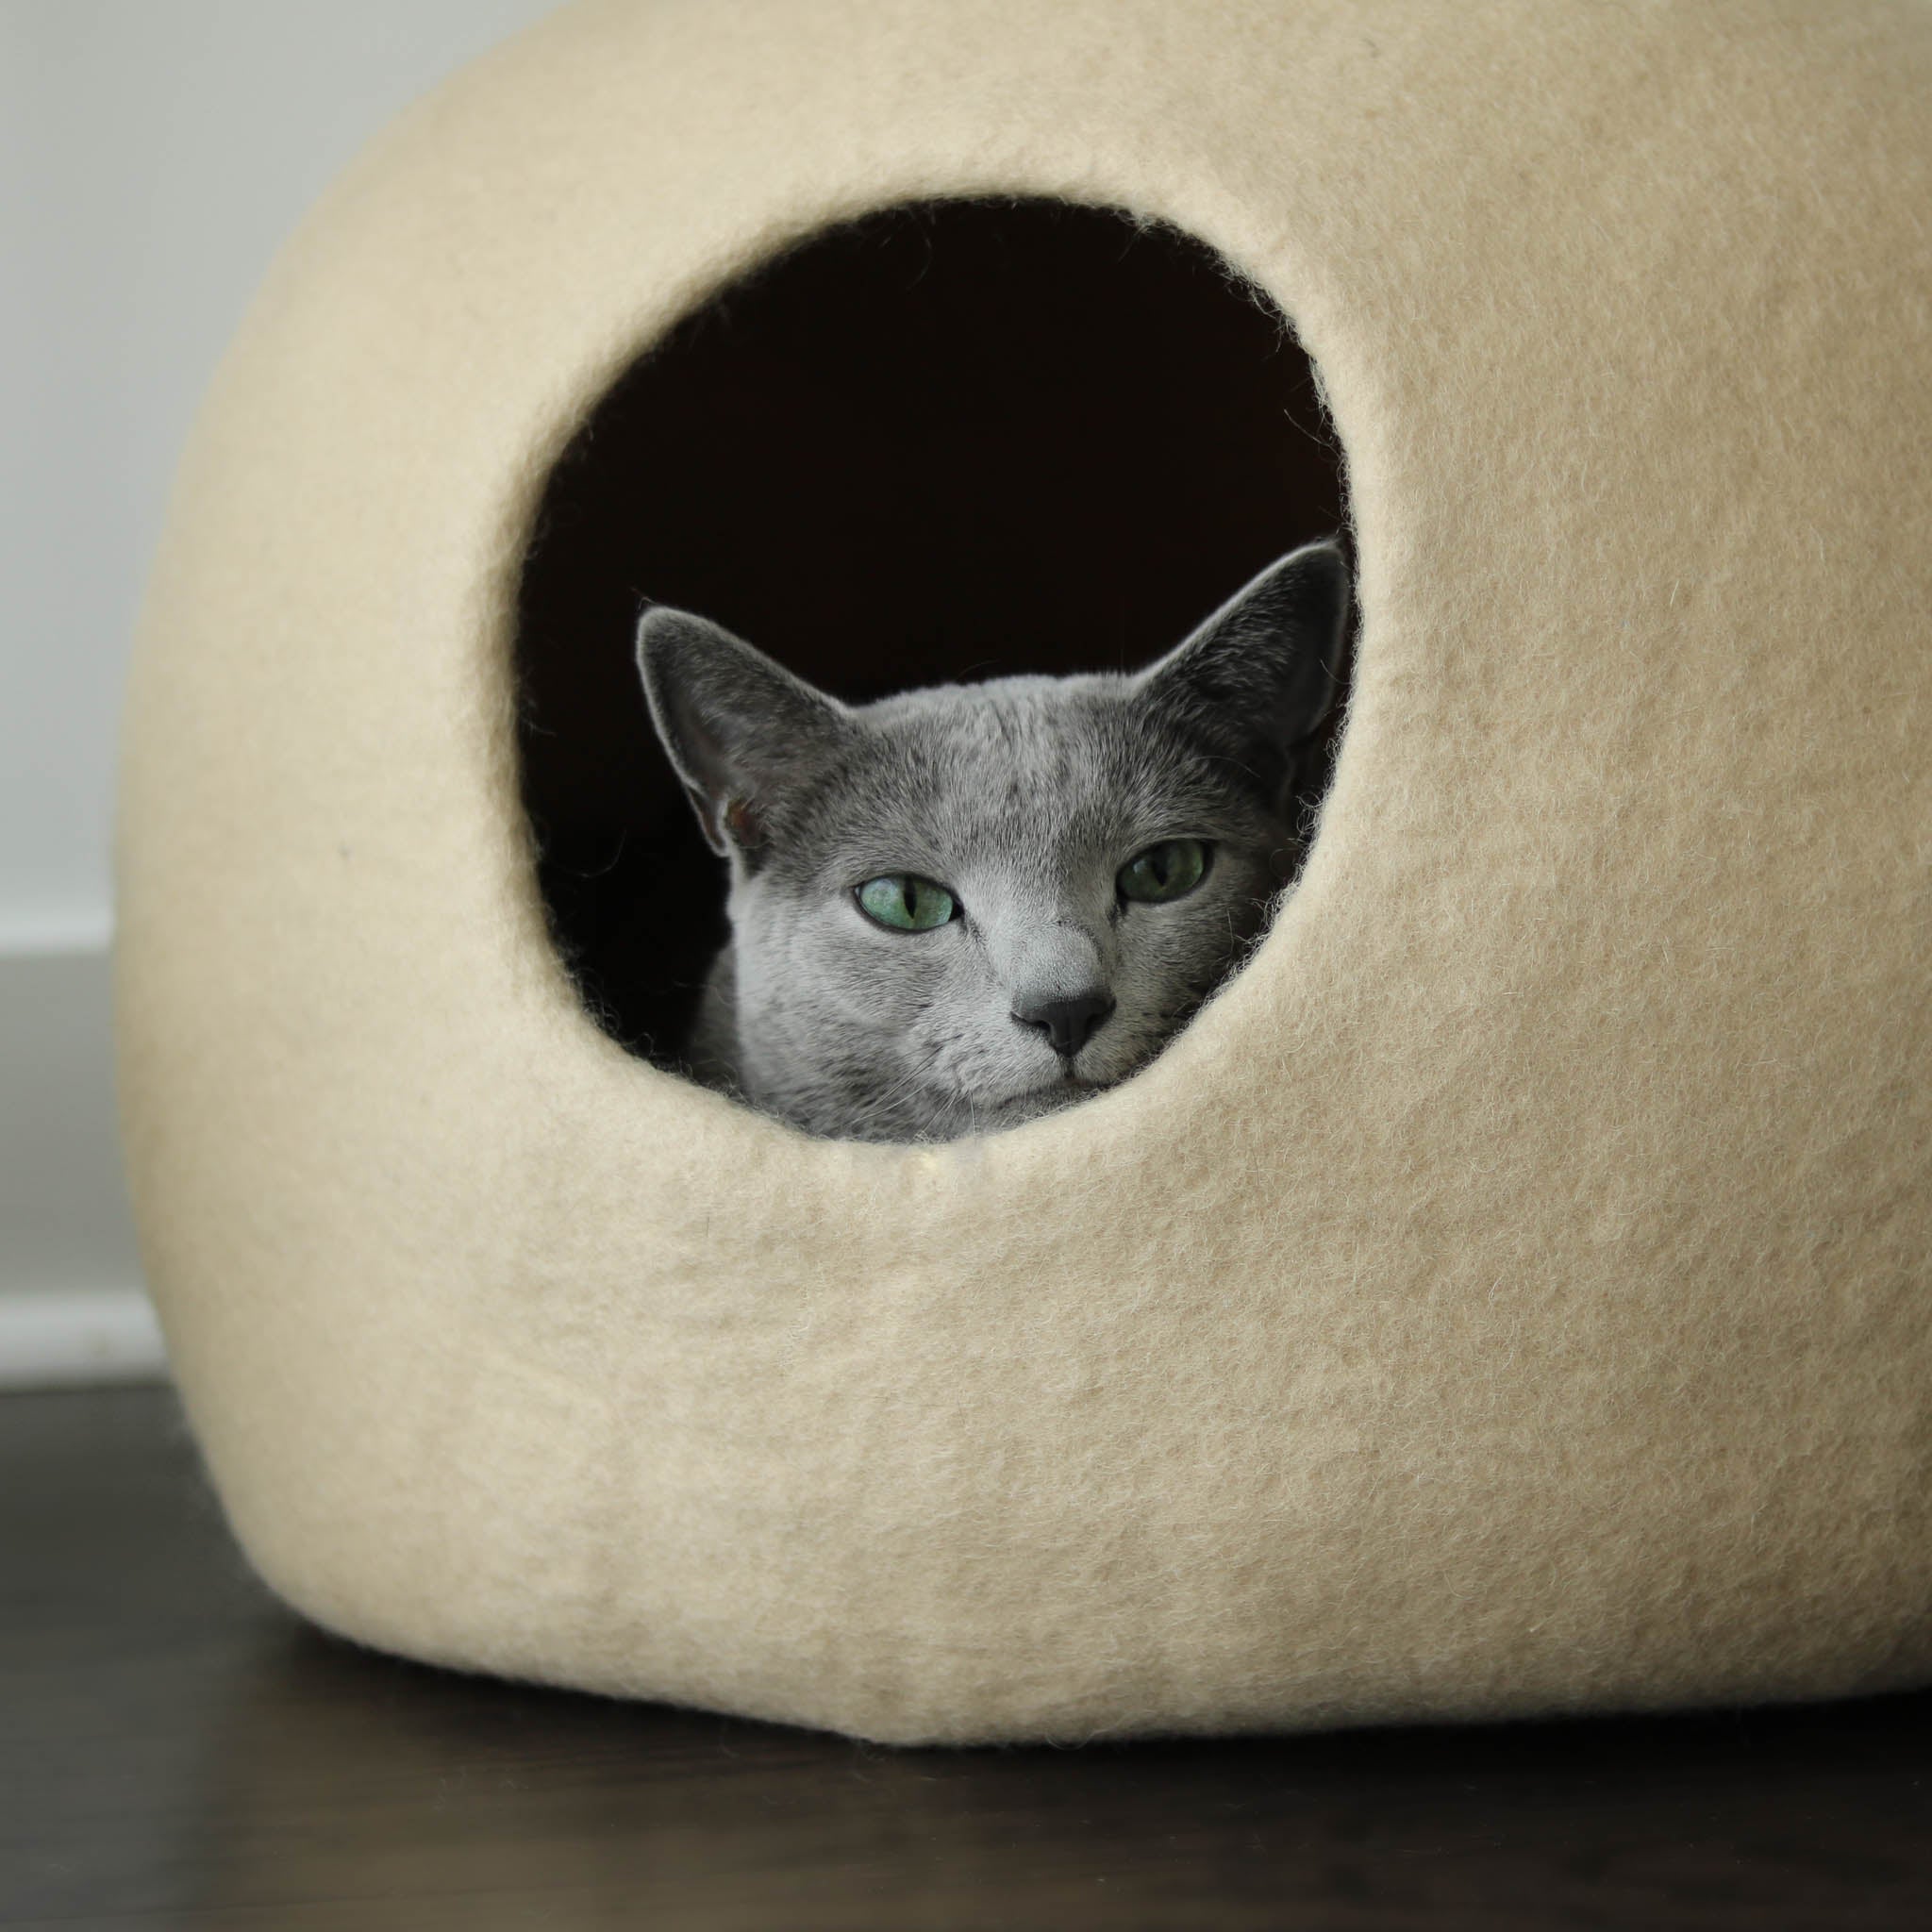 Why Do Cats Love Den-Like Beds?